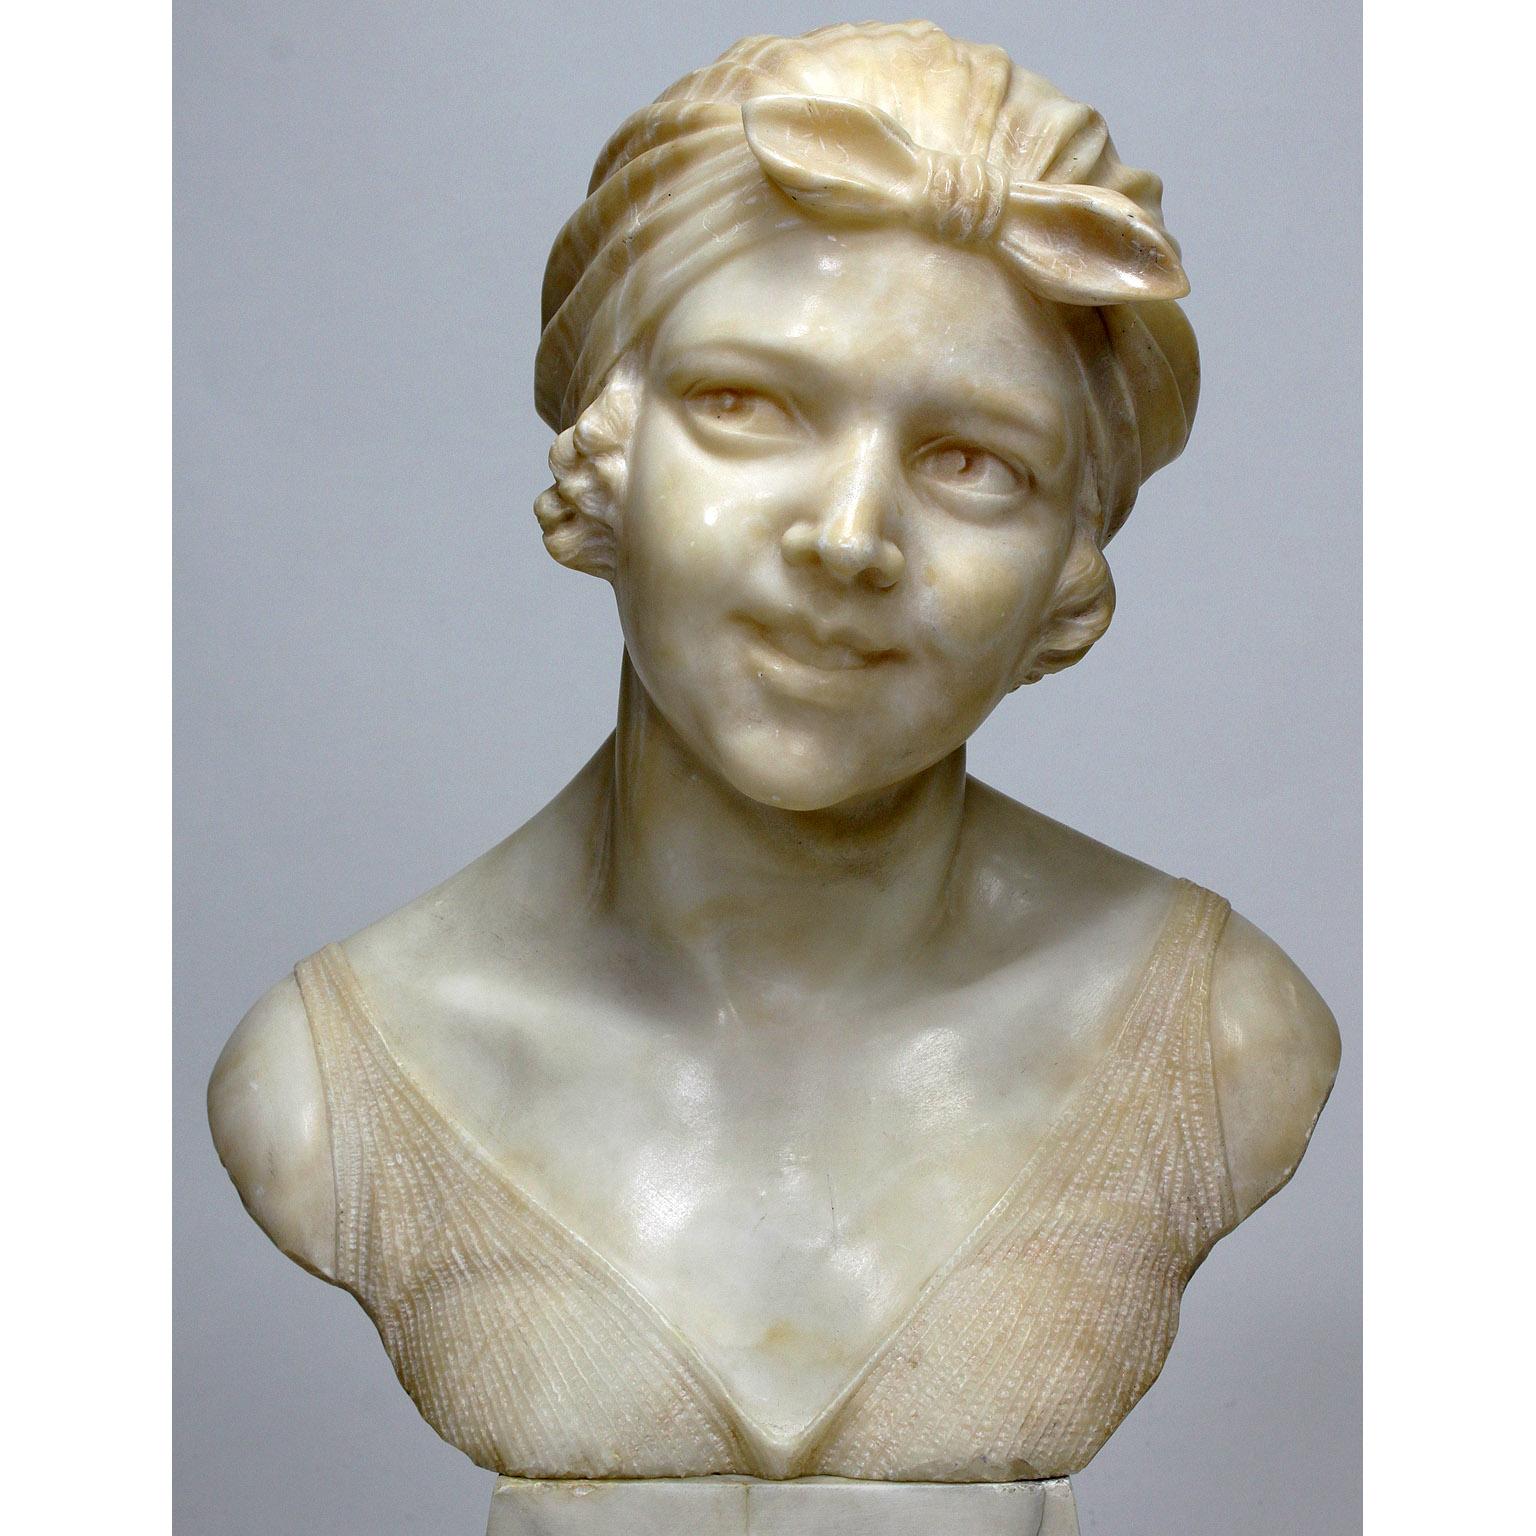  Italian 19th-20th Century Carved Alabaster Bust of a Young Girl with a Bandana In Good Condition For Sale In Los Angeles, CA